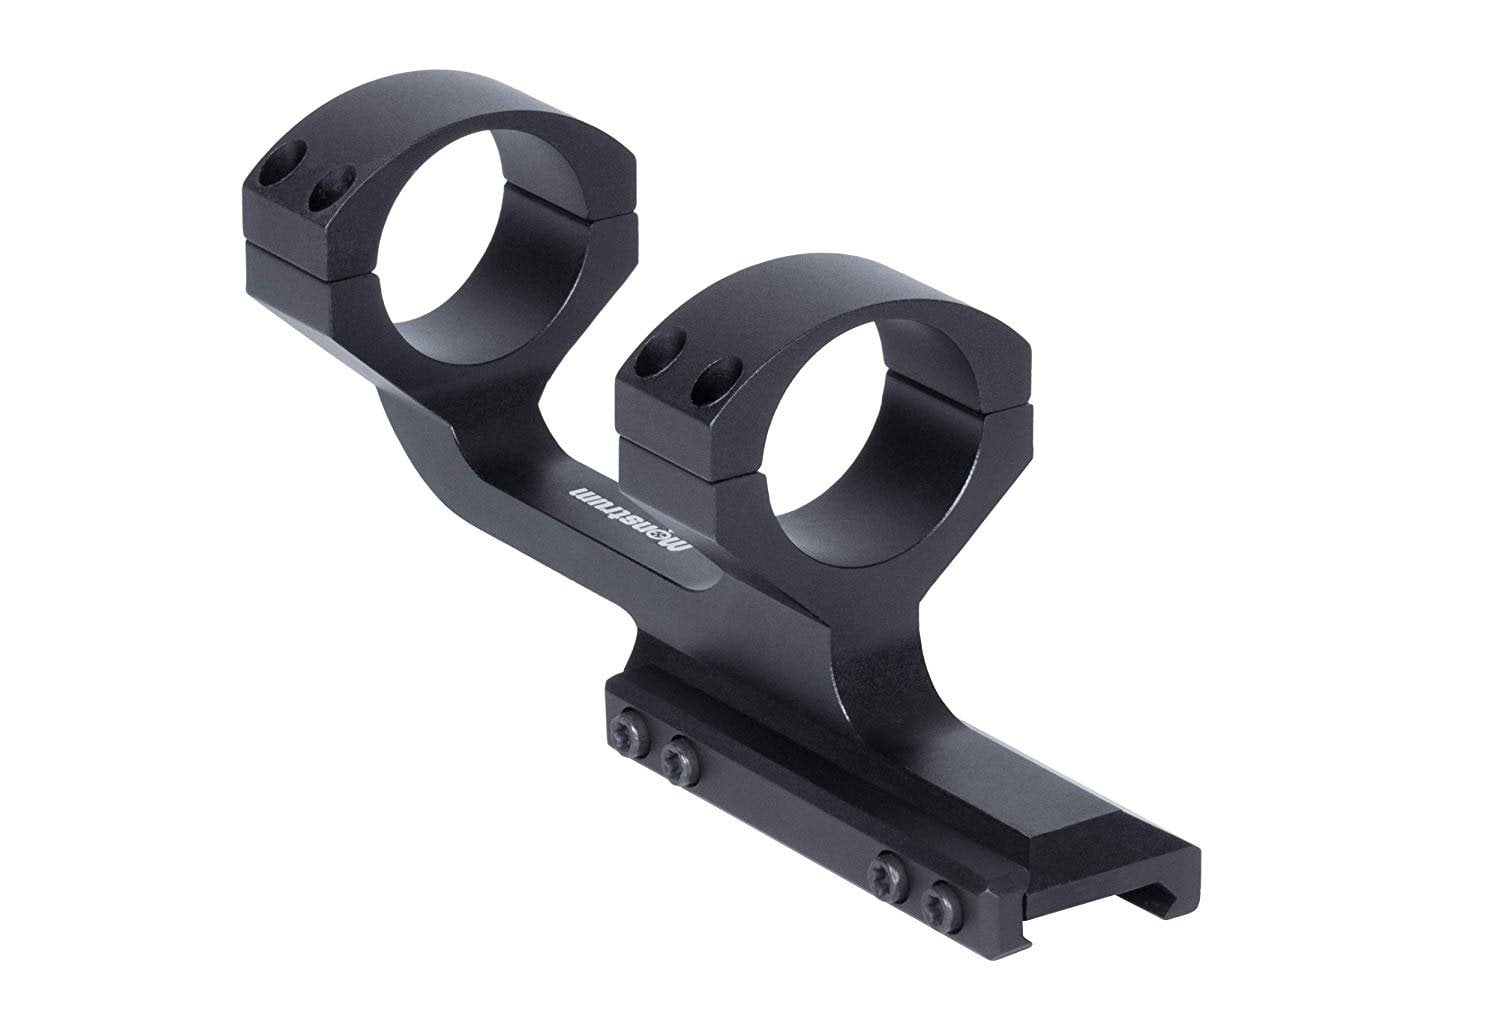 WestHunter Optics Offset Cantilever Picatinny Scope Mount 1/30mm Medium Profile One Piece Scope Dual Rings with Bubble Level 